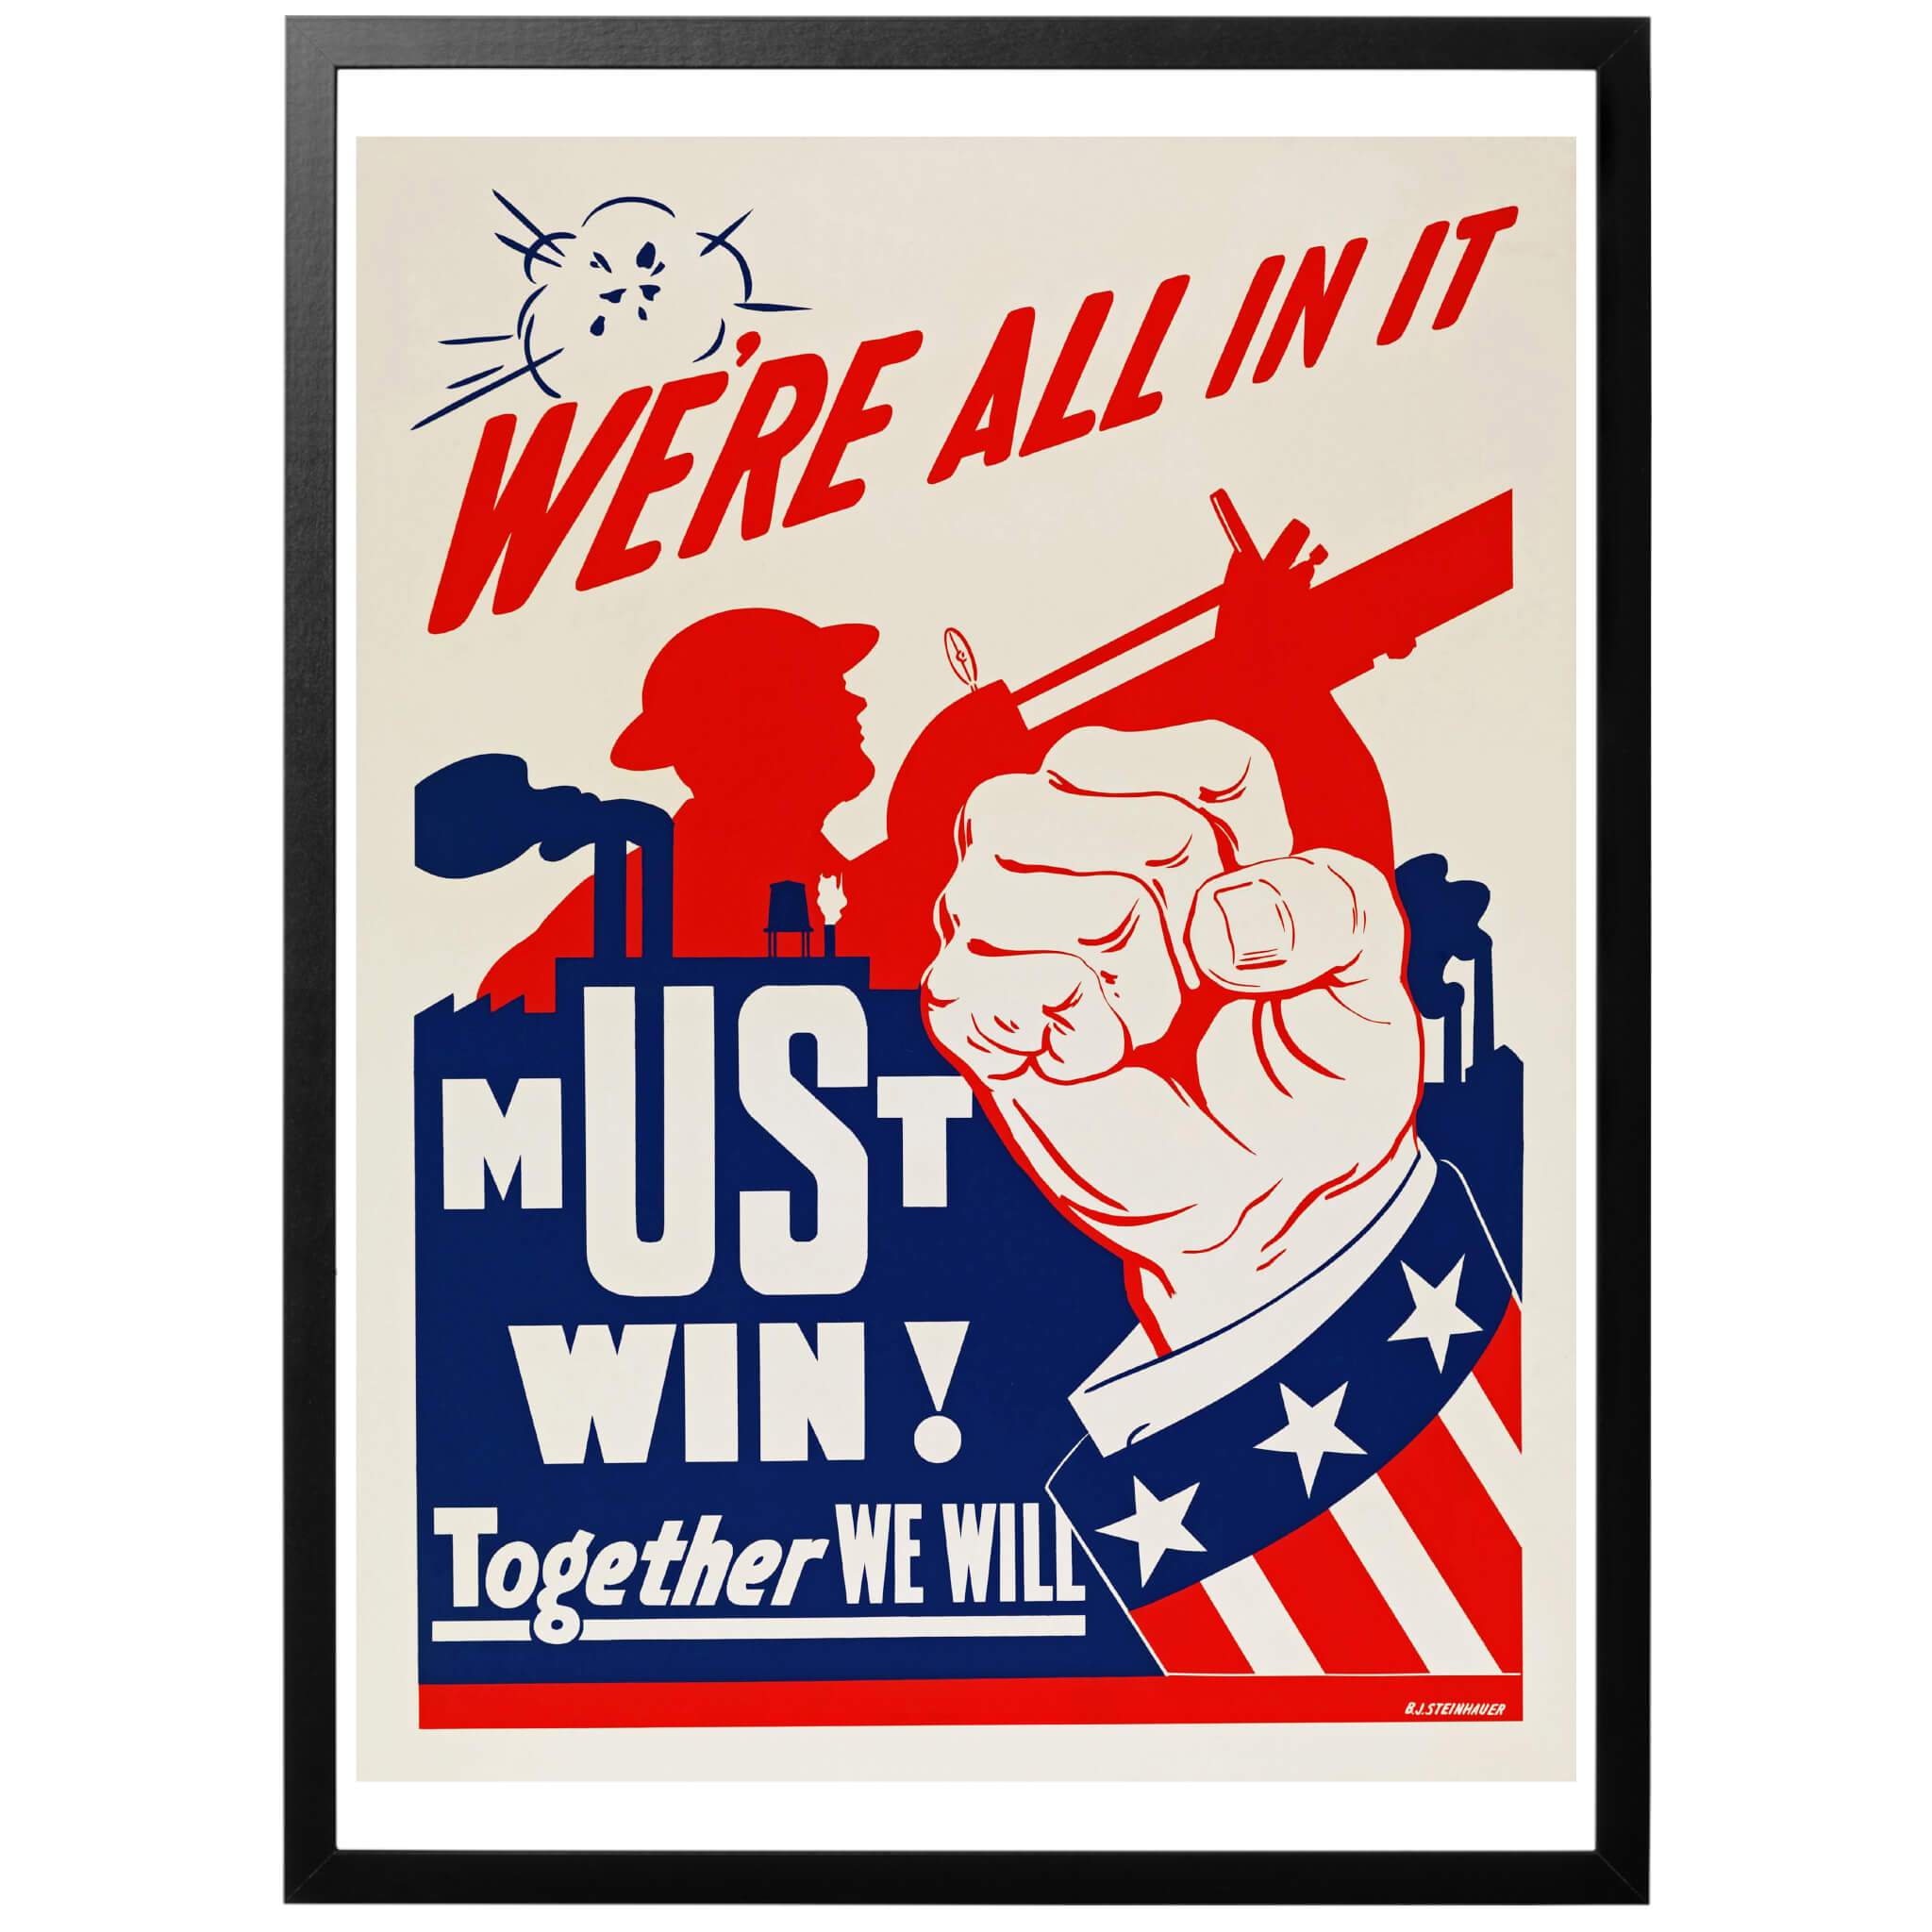 Together, We All Win